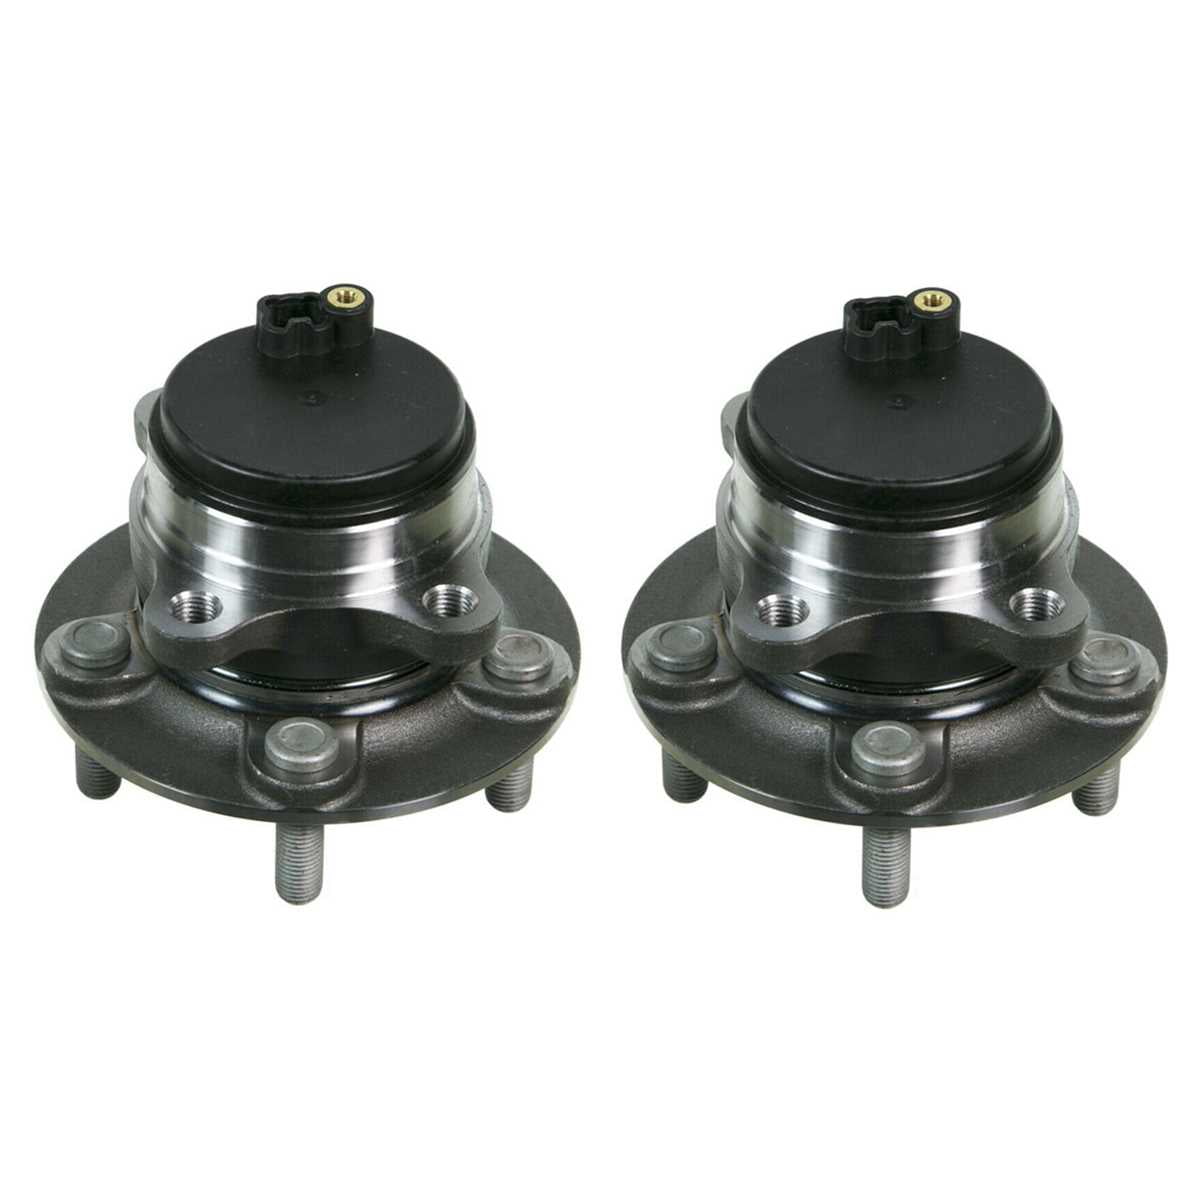 New Wheel Hubs Set of 2 Front or Rear Driver & Passenger For Ford Fusion Lincoln 